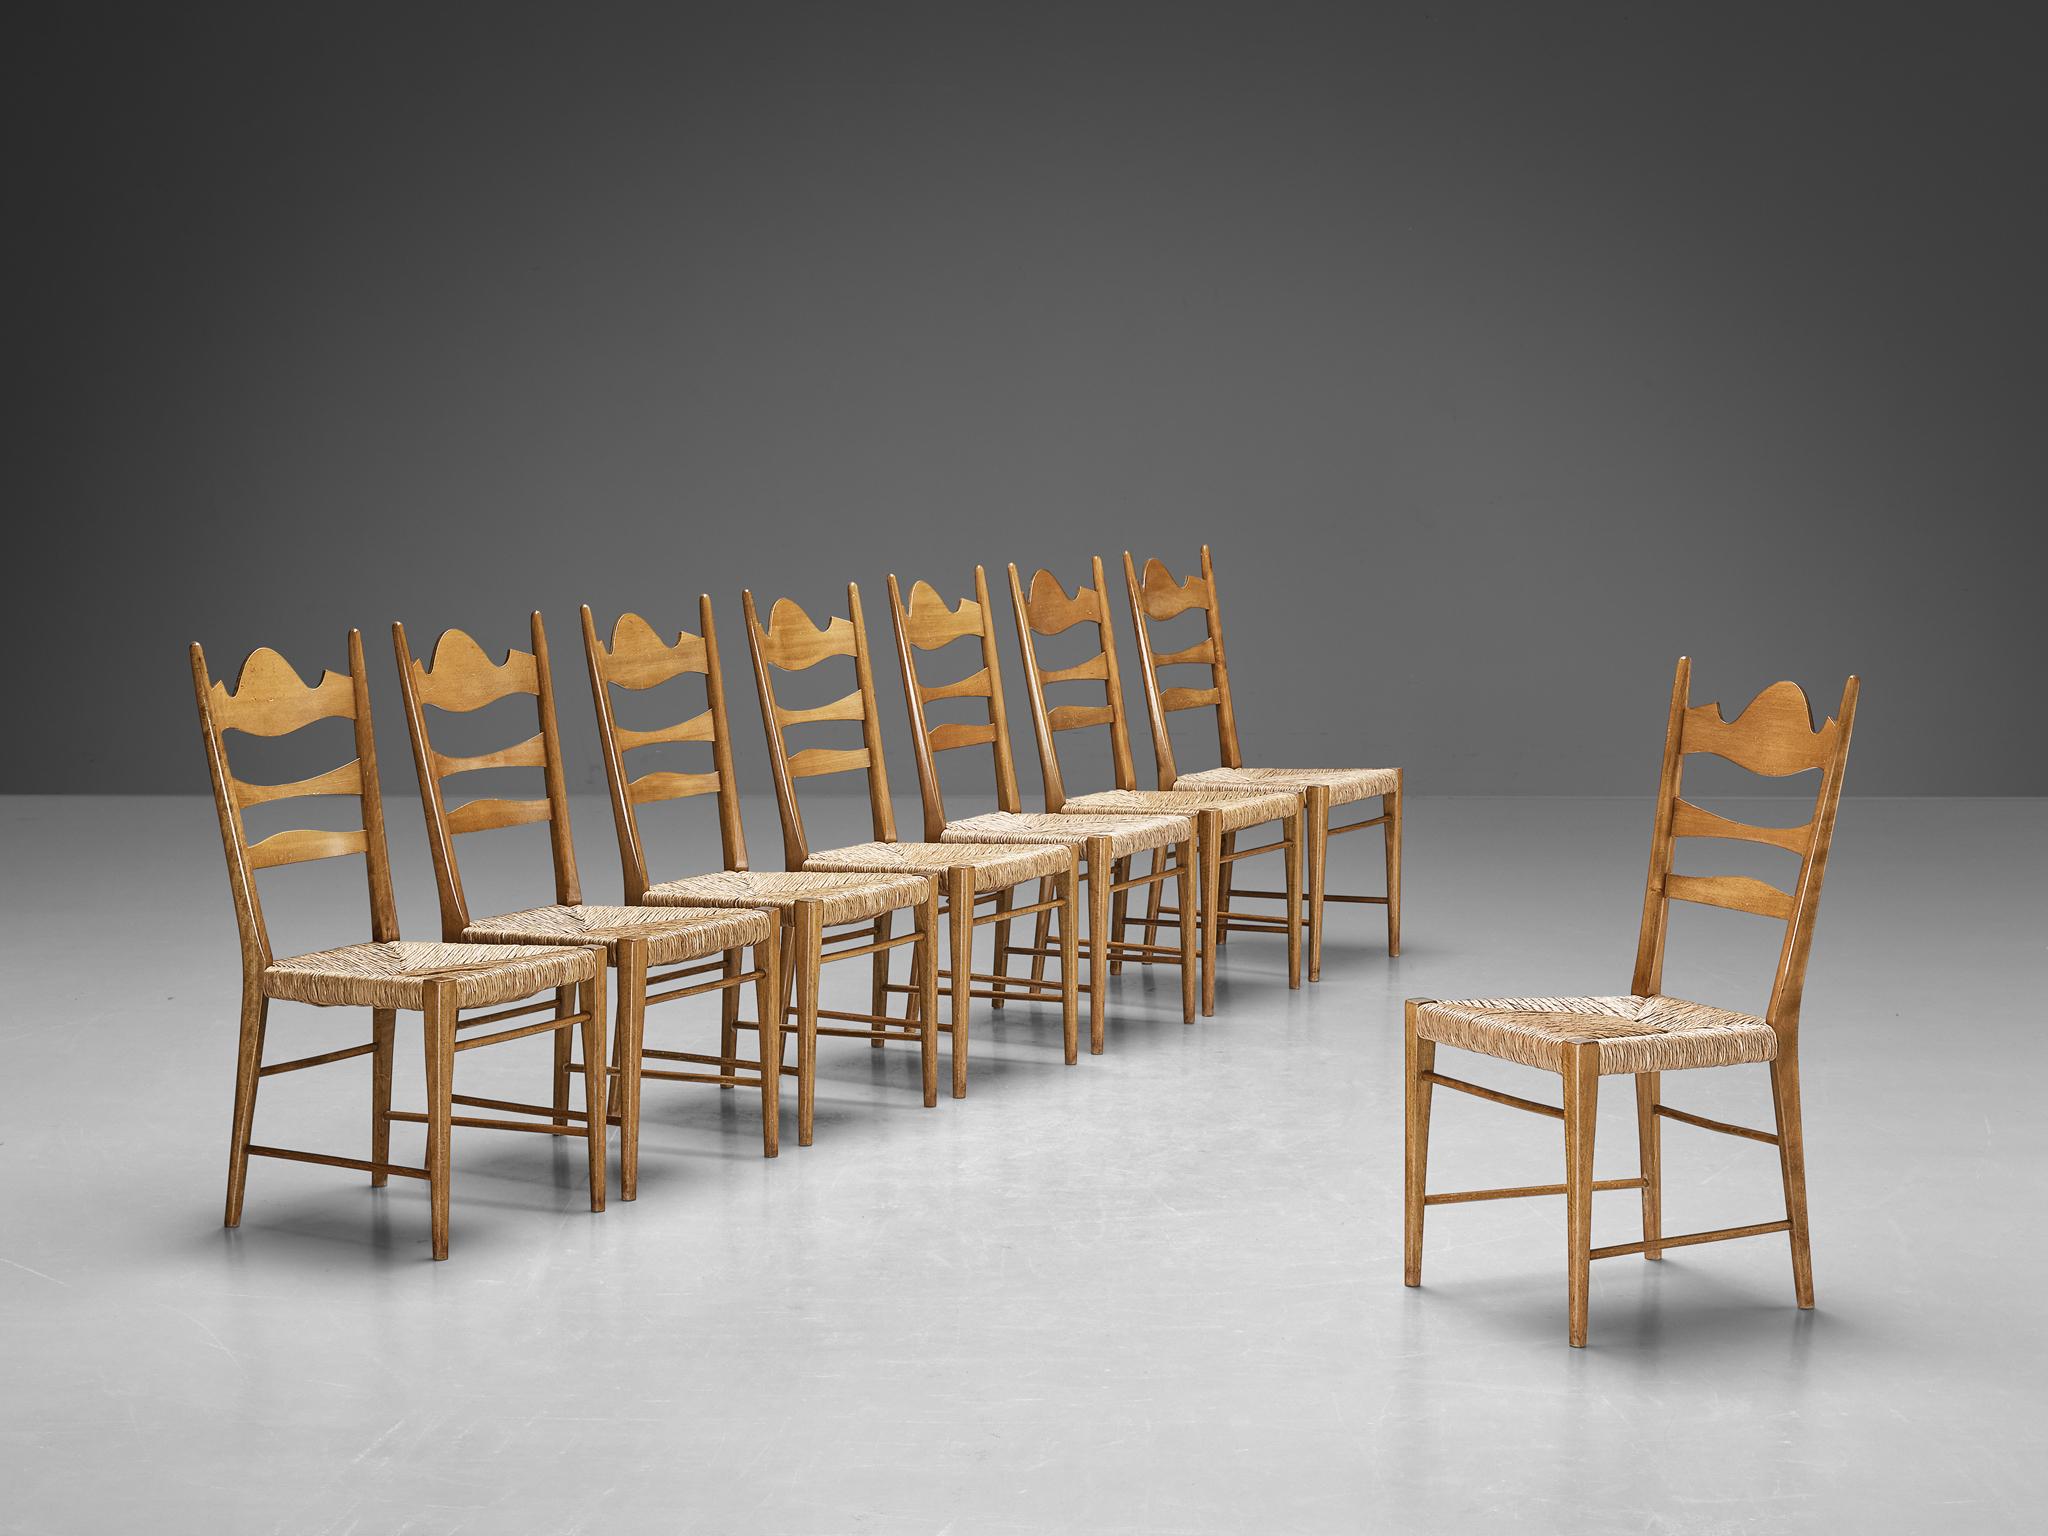 Set of eight dining chairs, beech, straw, Italy, 1950s

Crafted with a refined decorative allure and a rustic inclination, these chairs present exquisite craftsmanship and intricate woodcarvings, showcasing a unique design. The backrest features